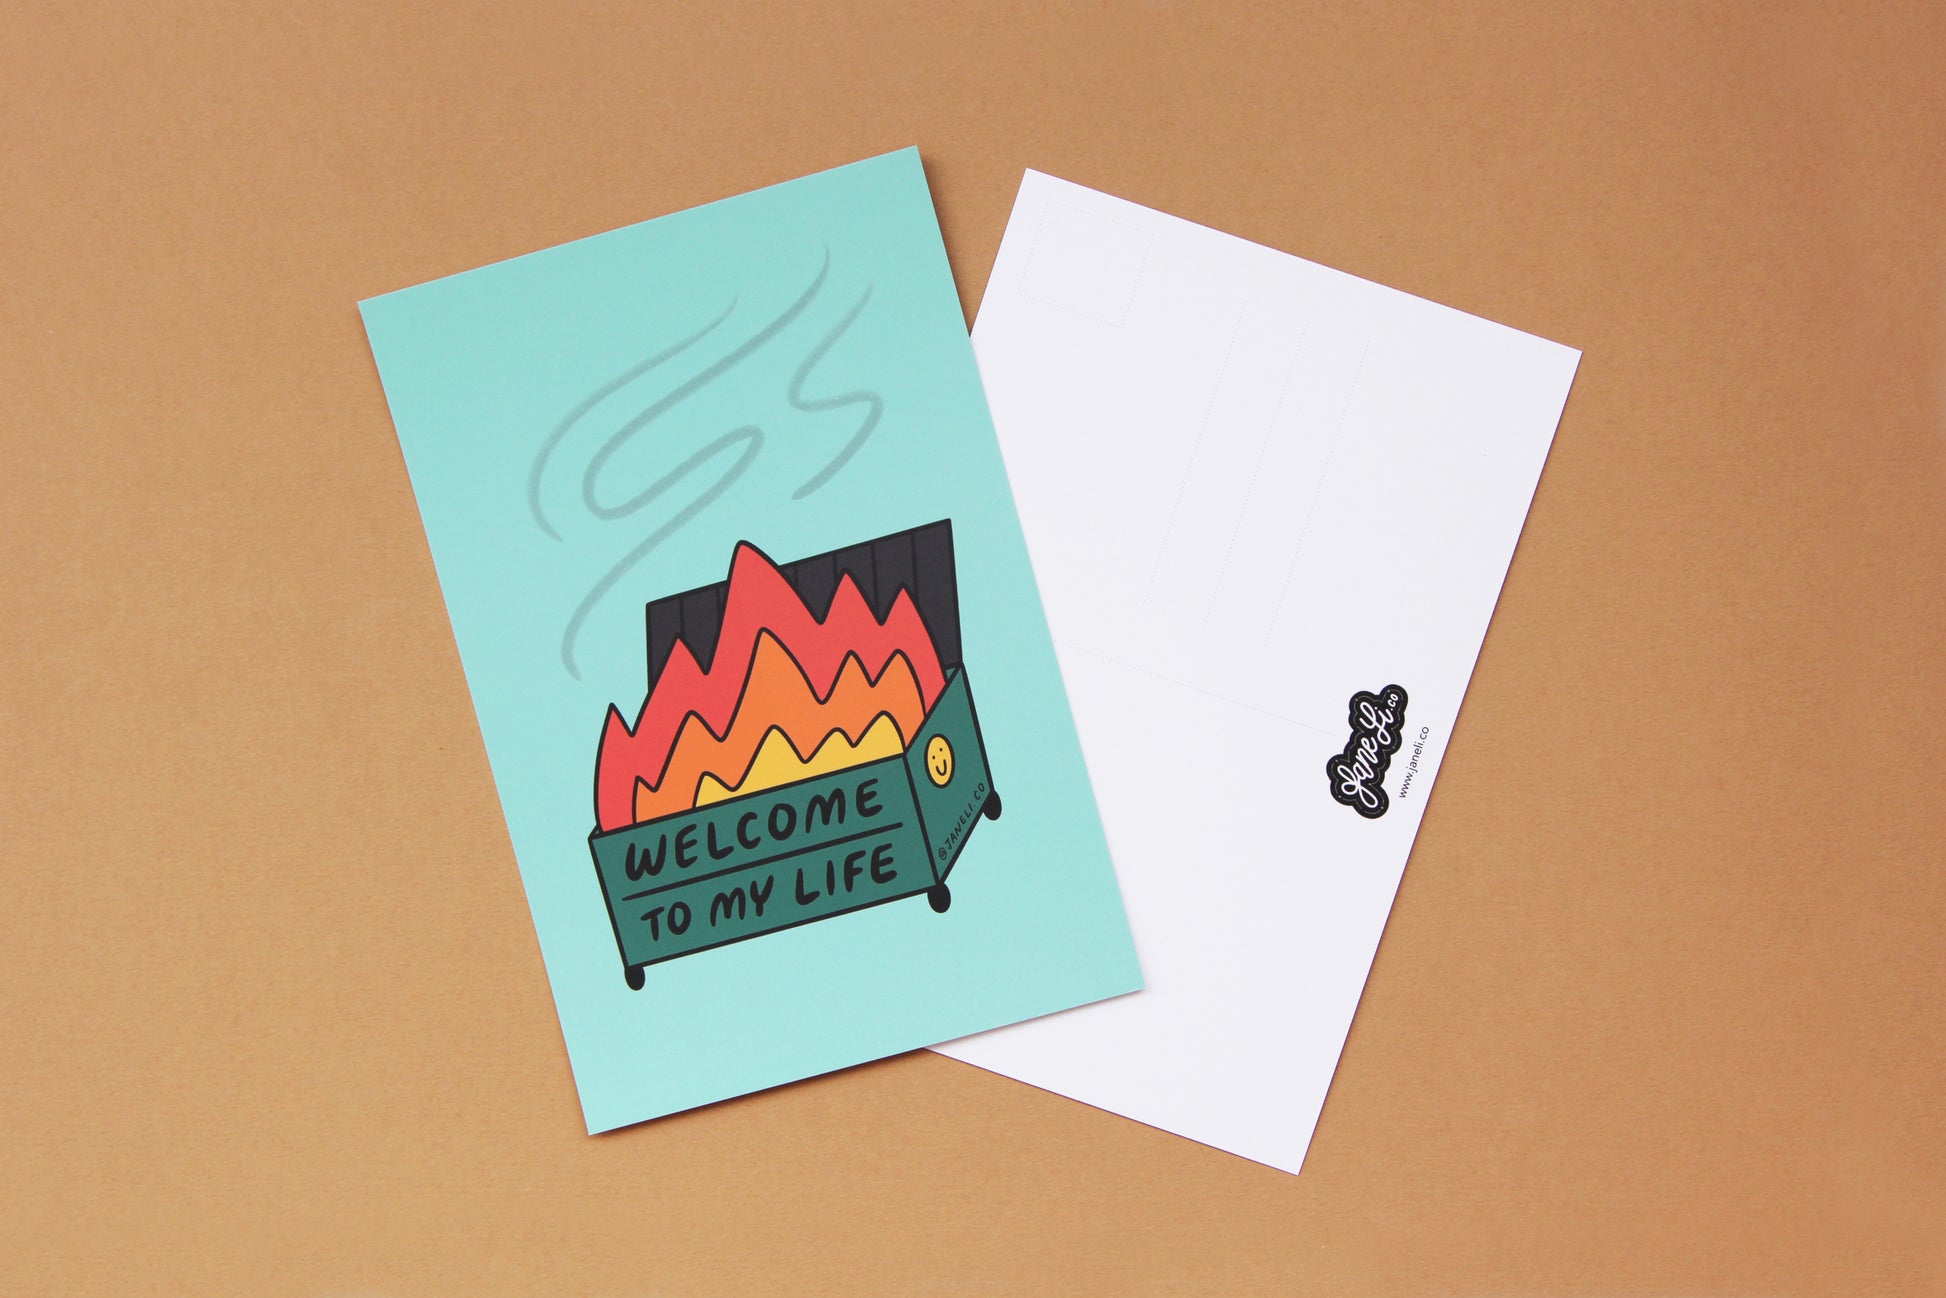 A JaneLi.Co mini print/postcard of a dumpster fire that says "Welcome to My Life" and a back postcard side of the same print over a tan background.